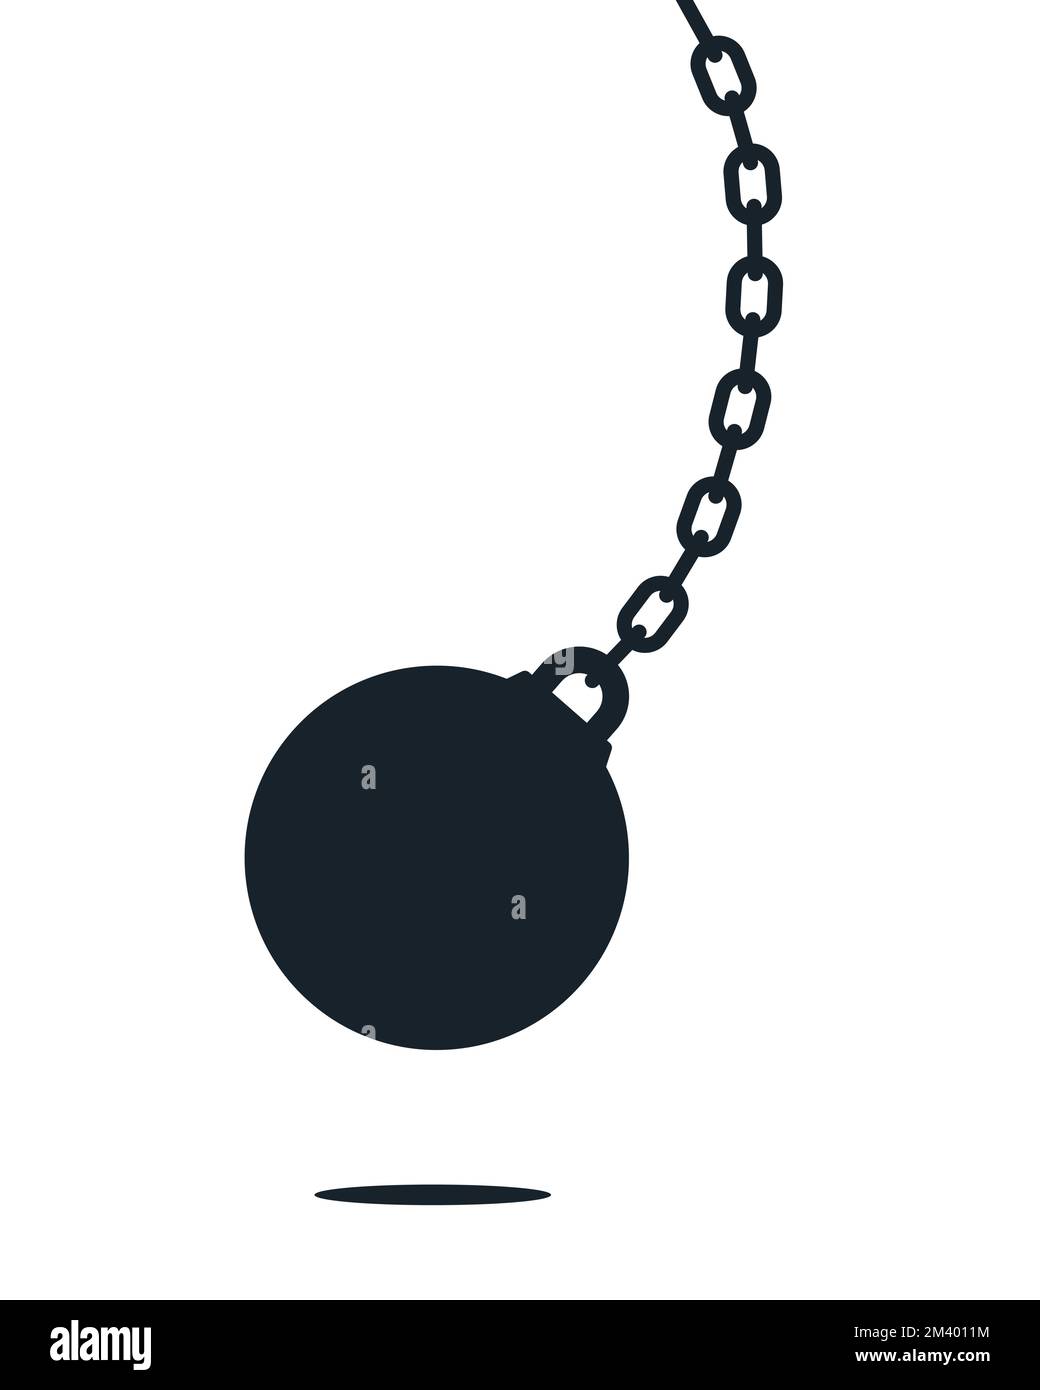 Swinging wrecking ball. Demolition sphere hanging on chains. Vector illustration on white background Stock Vector